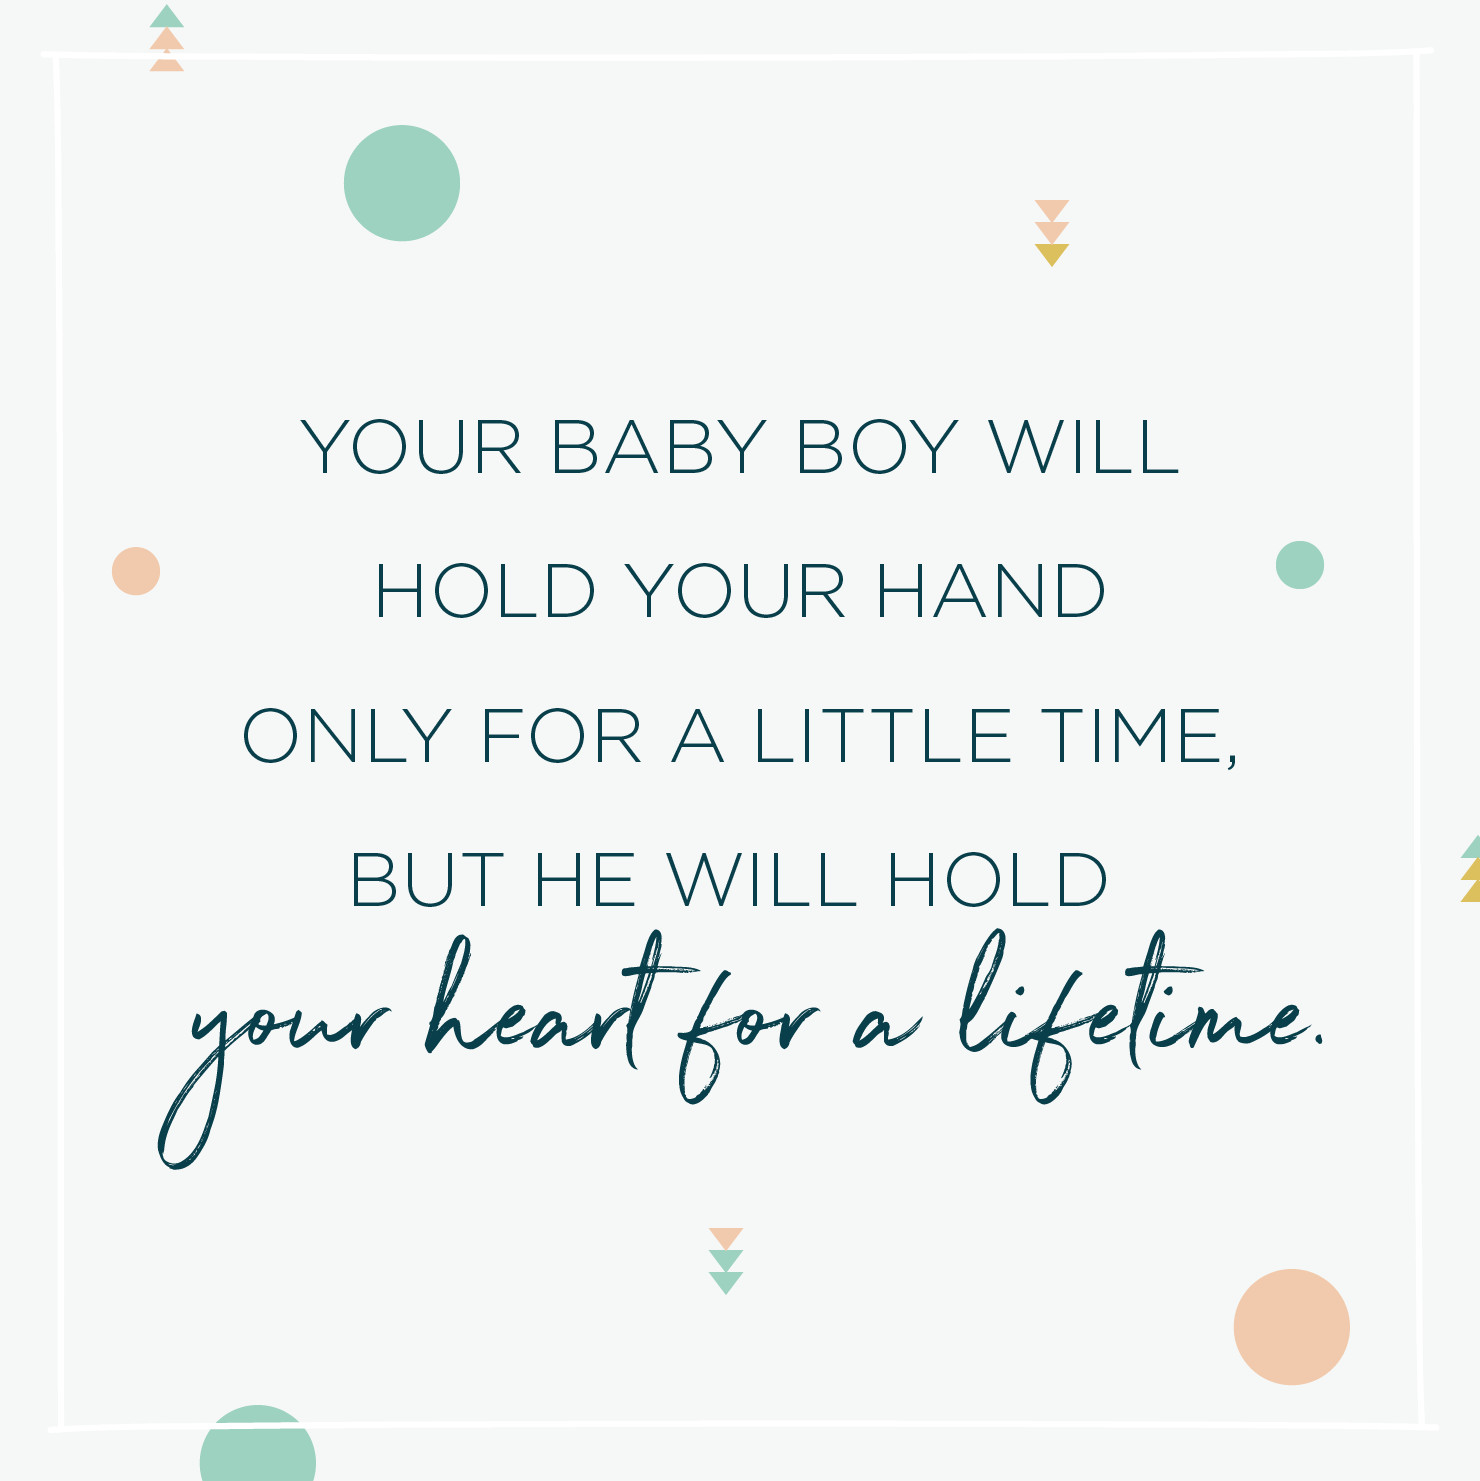 Quotes For Having A Baby
 84 Inspirational Baby Quotes and Sayings